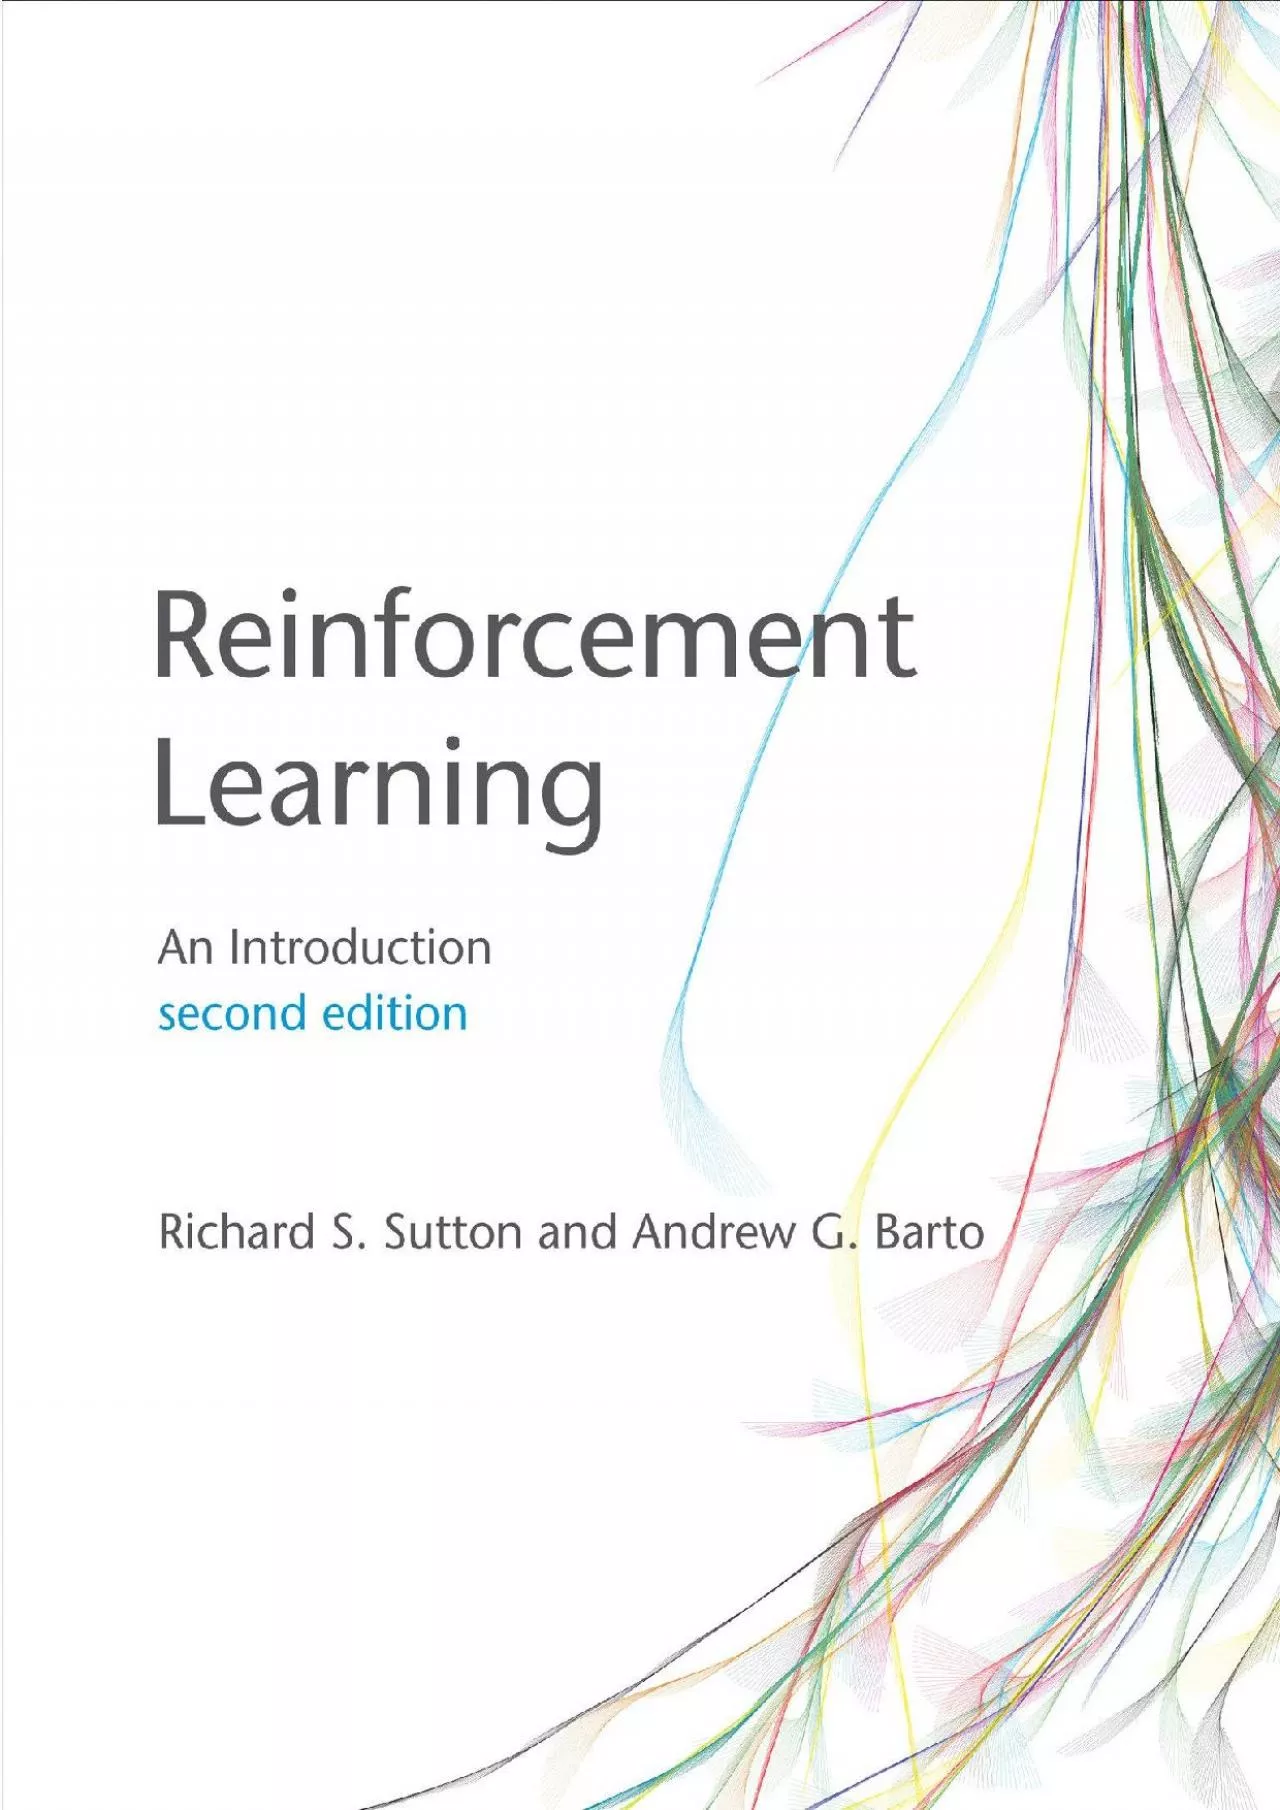 (DOWNLOAD)-Reinforcement Learning, second edition: An Introduction (Adaptive Computation